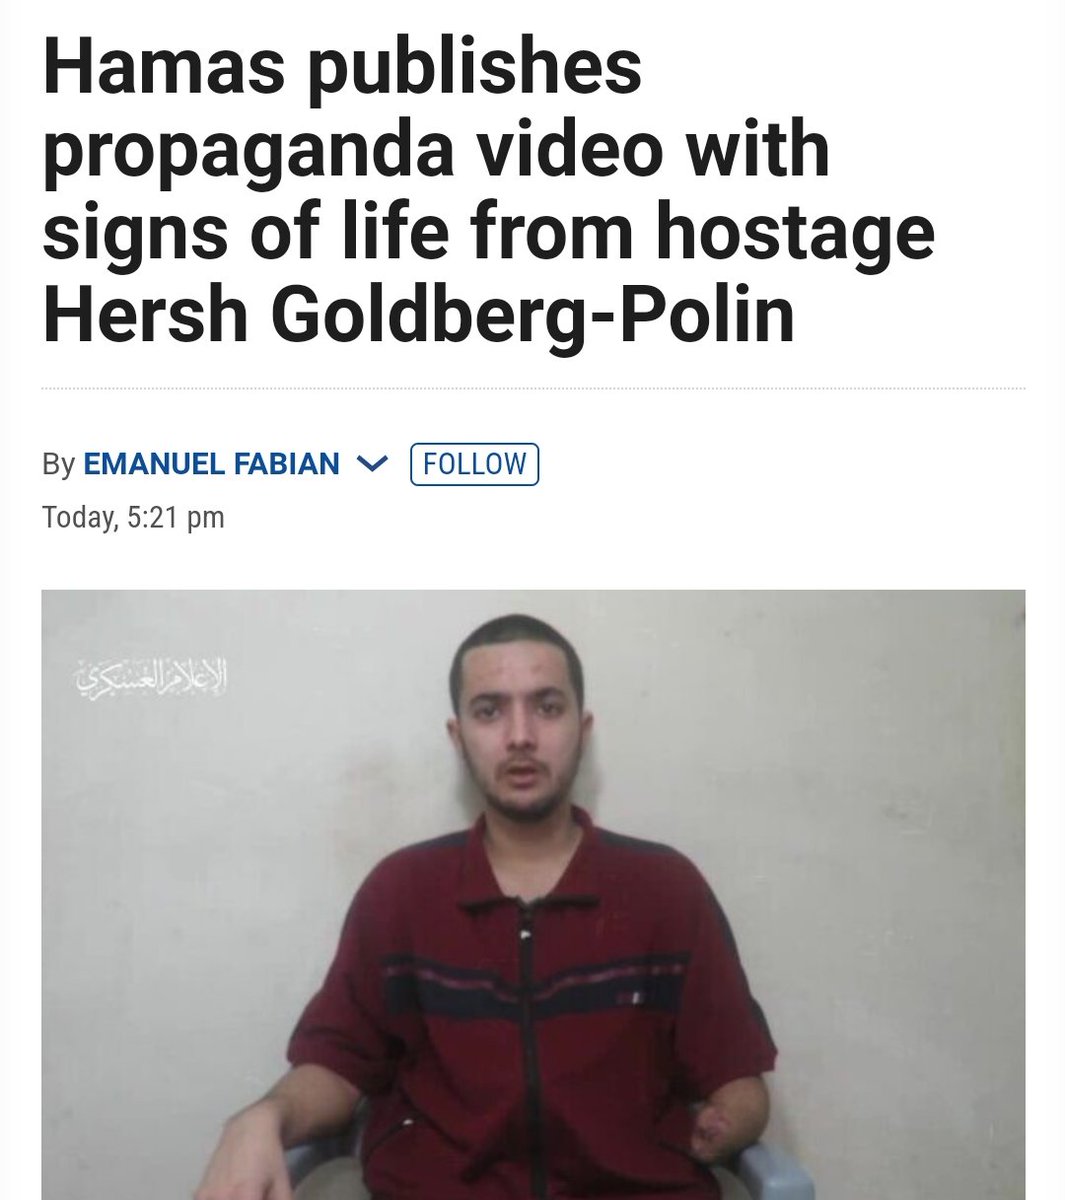 This is absolutely sick. Hamas sat down a hostage, whose arm they blew off, and recorded a scripted video with ominous music and poor editing, accusing Israel/Netanyahu of neglecting Israelis. This is a war crime on multiple levels.

The same people who dismissed the confessions…